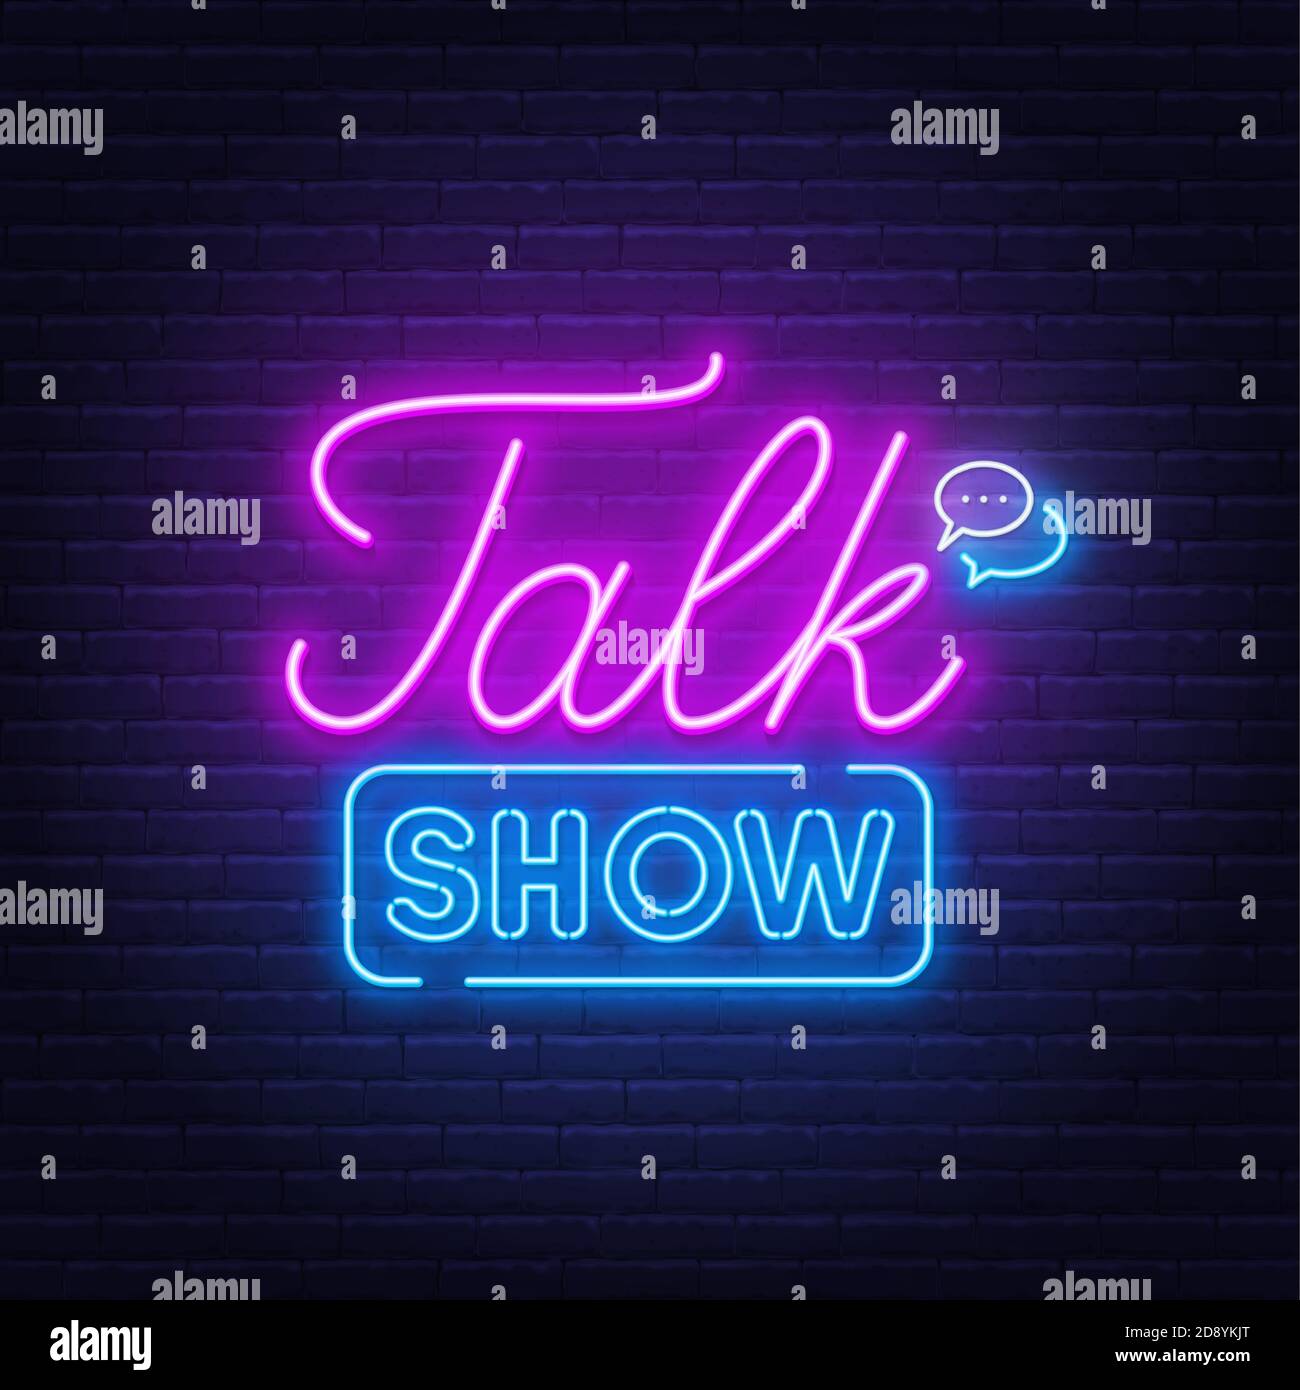 Talk show neon sign on brick wall background. Stock Vector